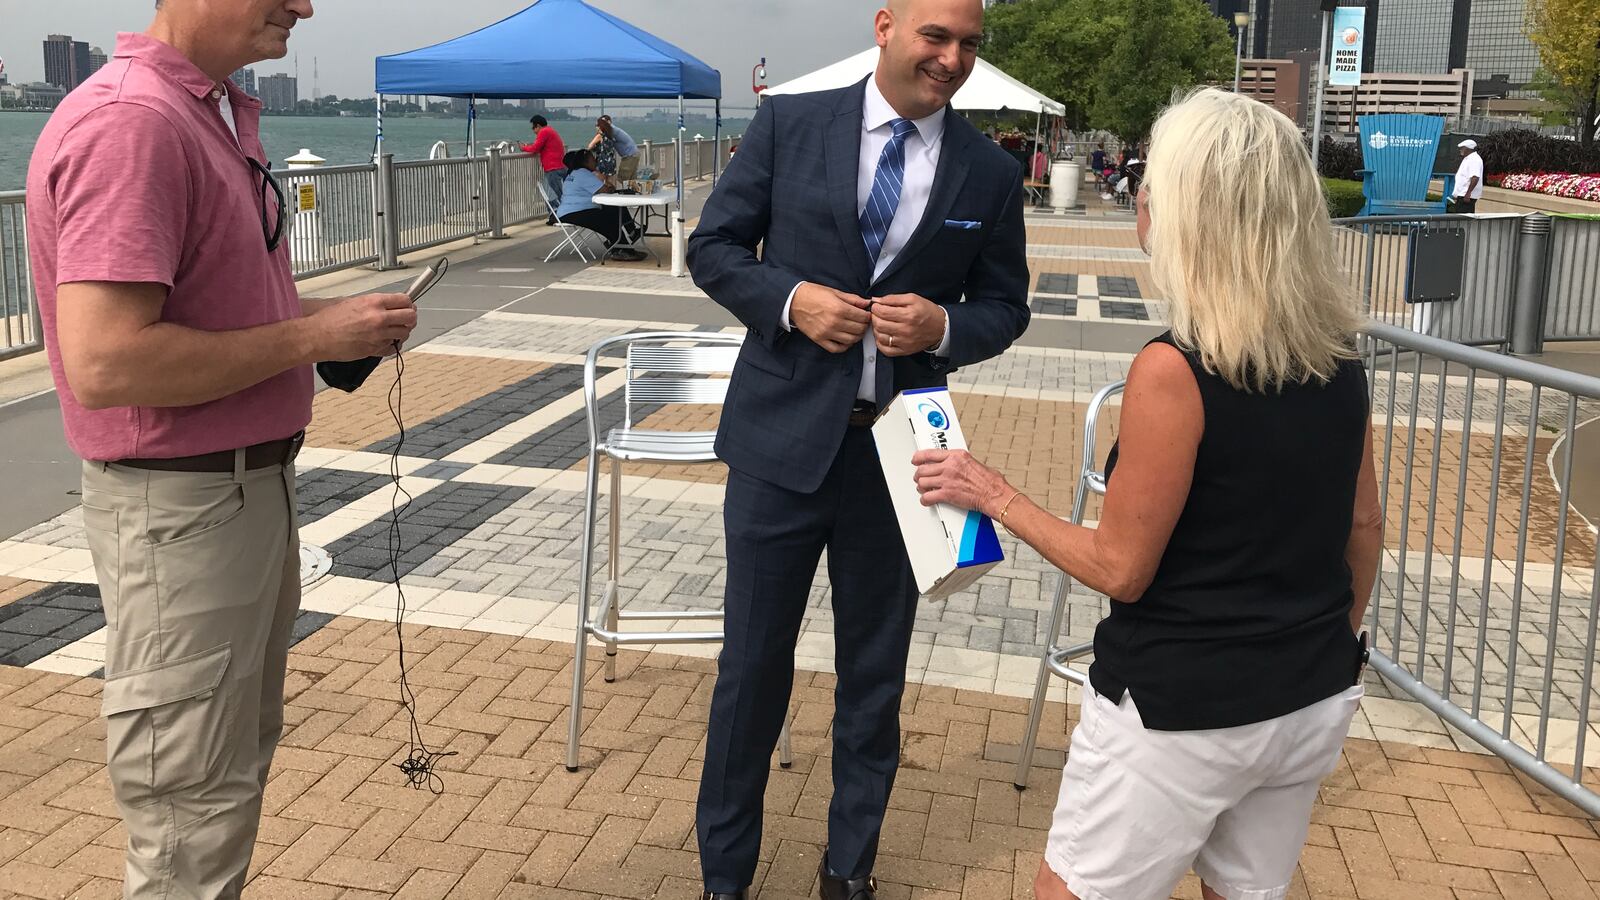 Detroit schools Superintendent Nikolai Vitti prepares for a TV interview on Detroit's RiverWalk in August 2017, before the start of his first school year at the helm of the district.